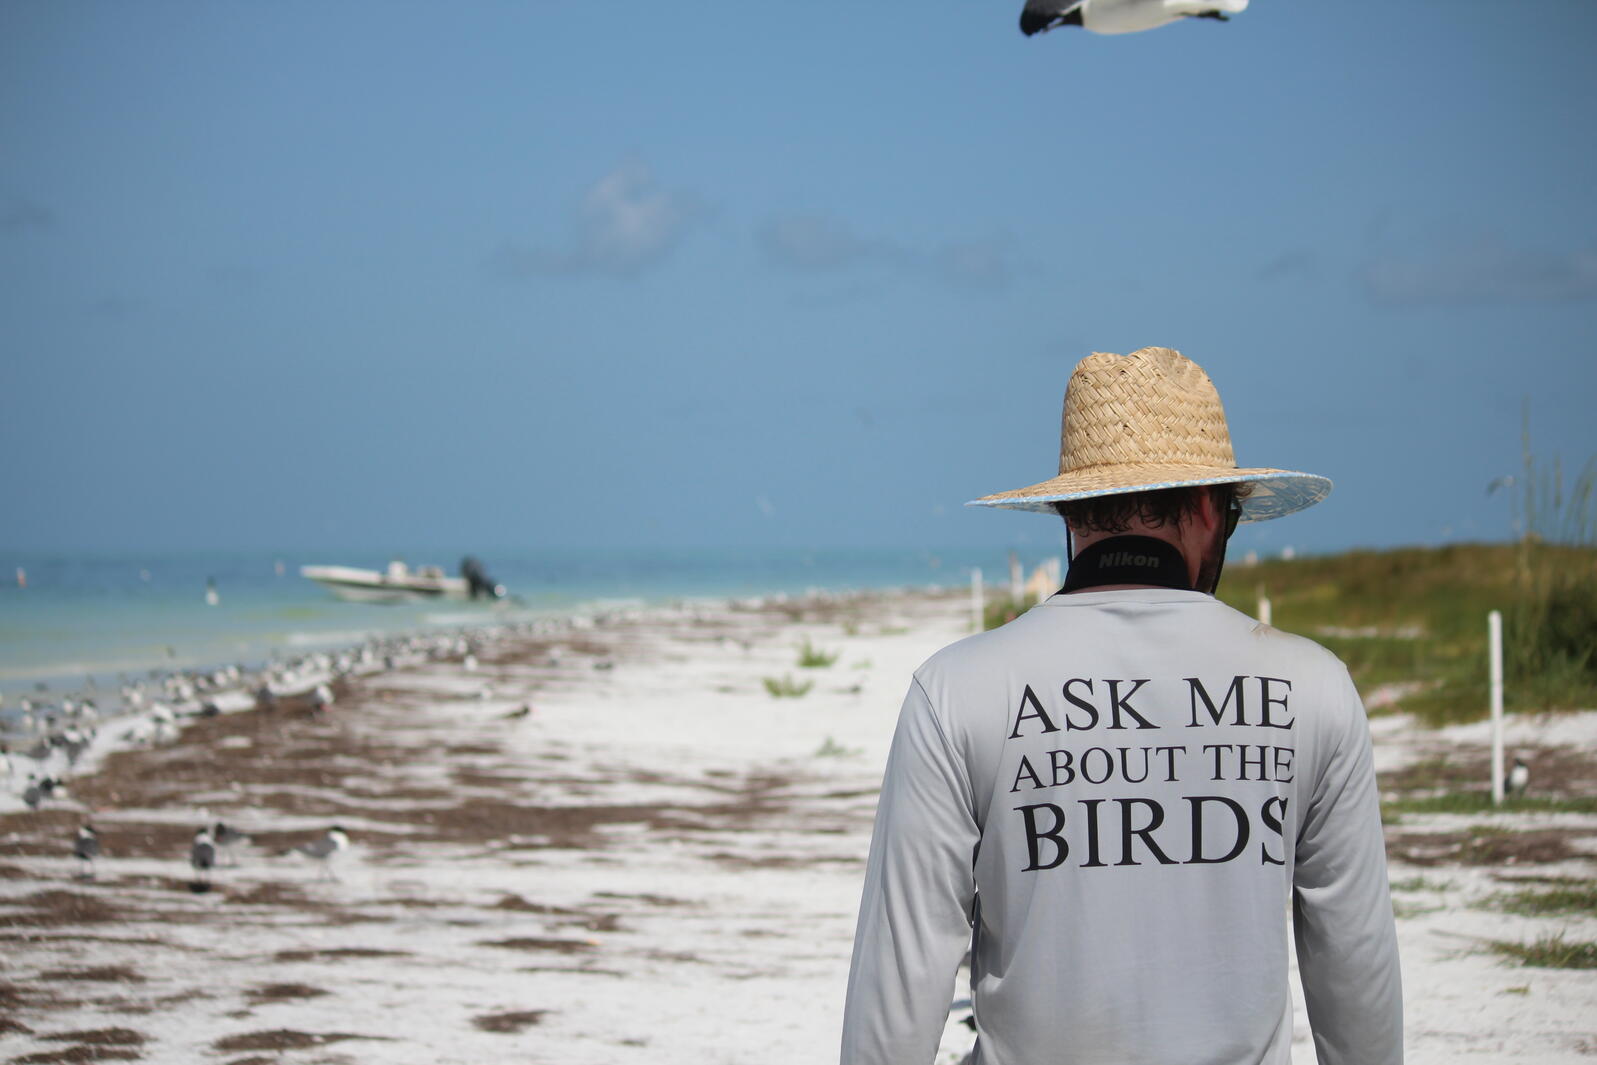 Evan standing away from the camera, with his "ask me about the birds" shirt in full view. He is standing on a beach, with water in the background.